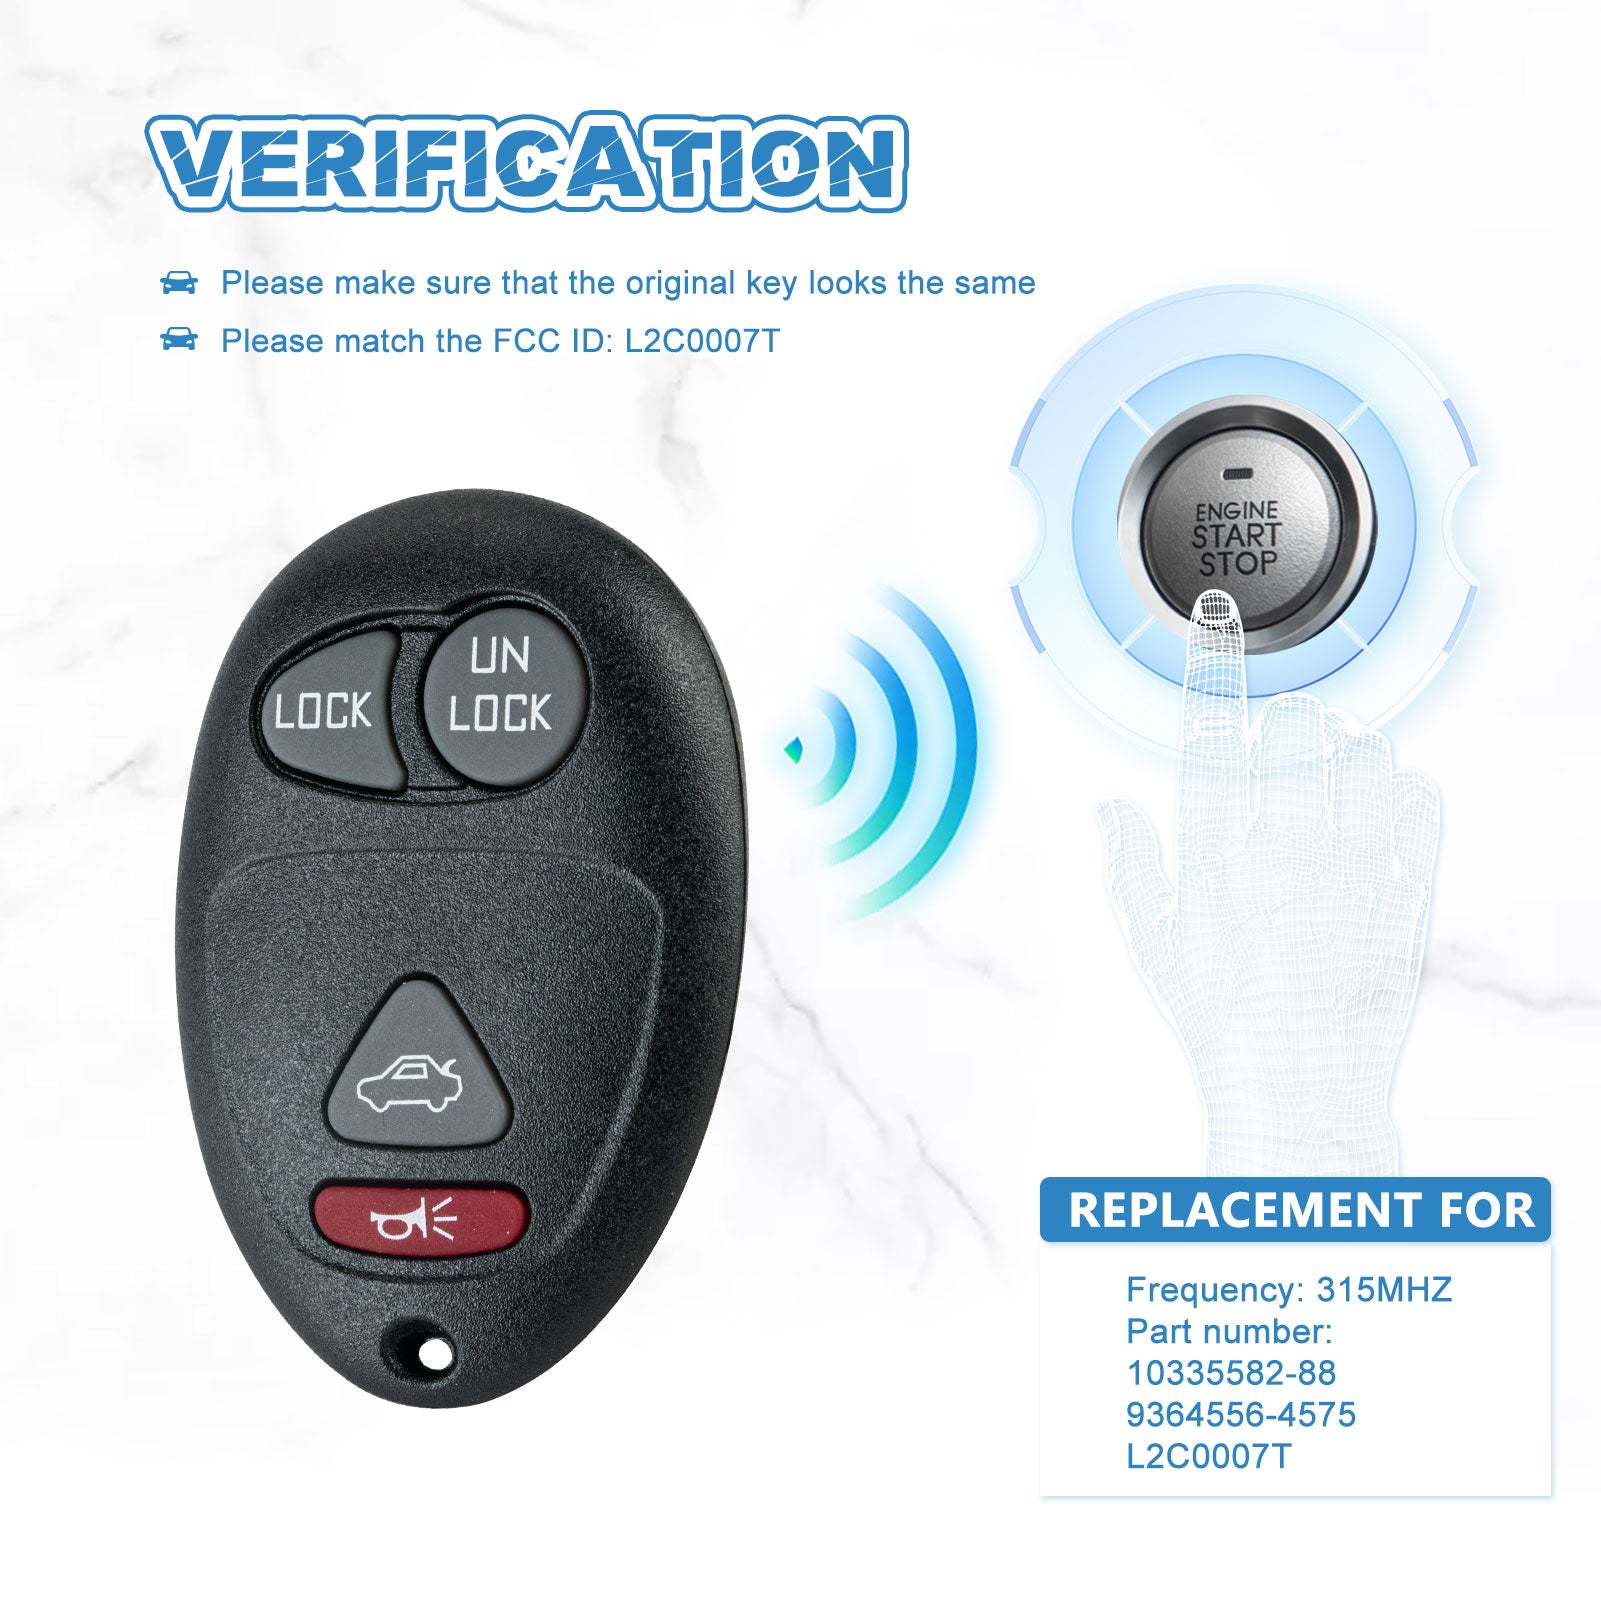 Keyless Entry Car Key Fob 315MHZ Replacement for 2001-2004 Buiick Regal, 2002-2007 Buiick Rendezvous L2C0007T  KR-U4RA